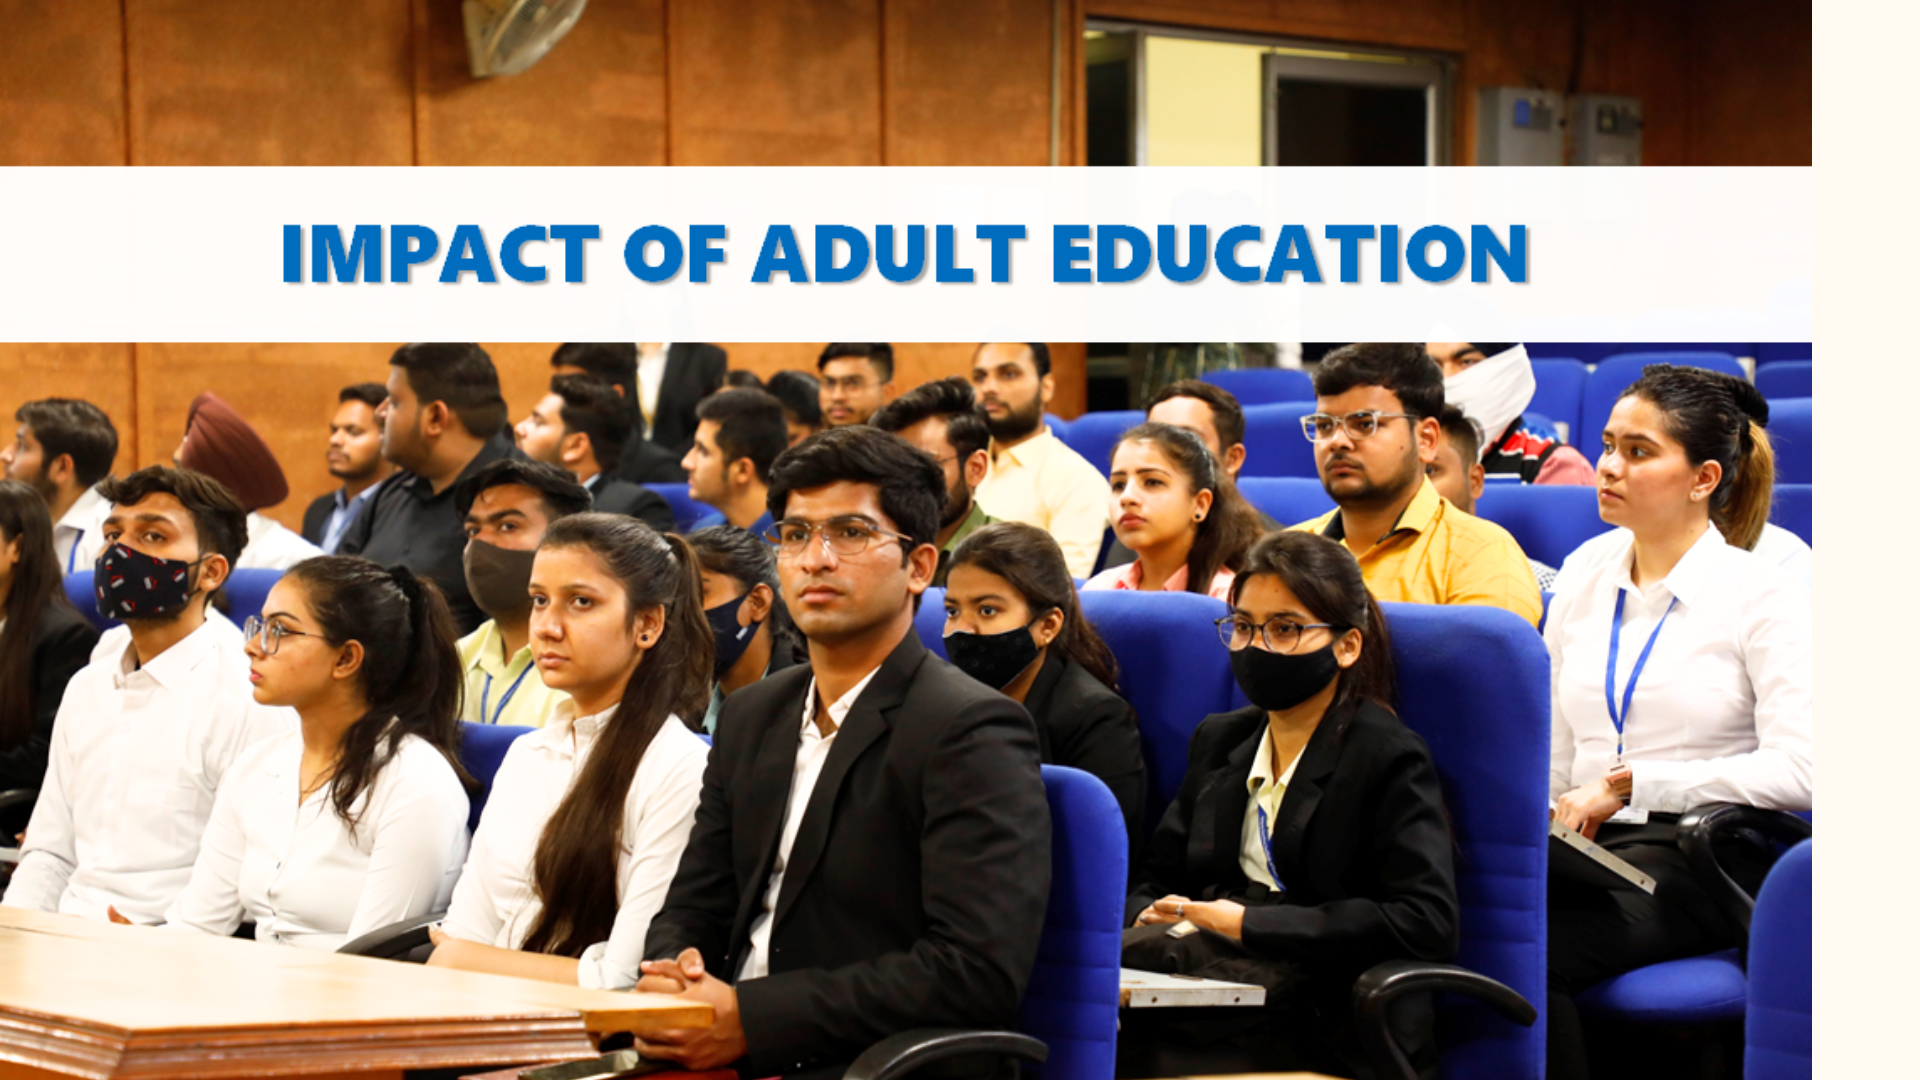 Transformative Impact of Adult Education in Empowering Lives